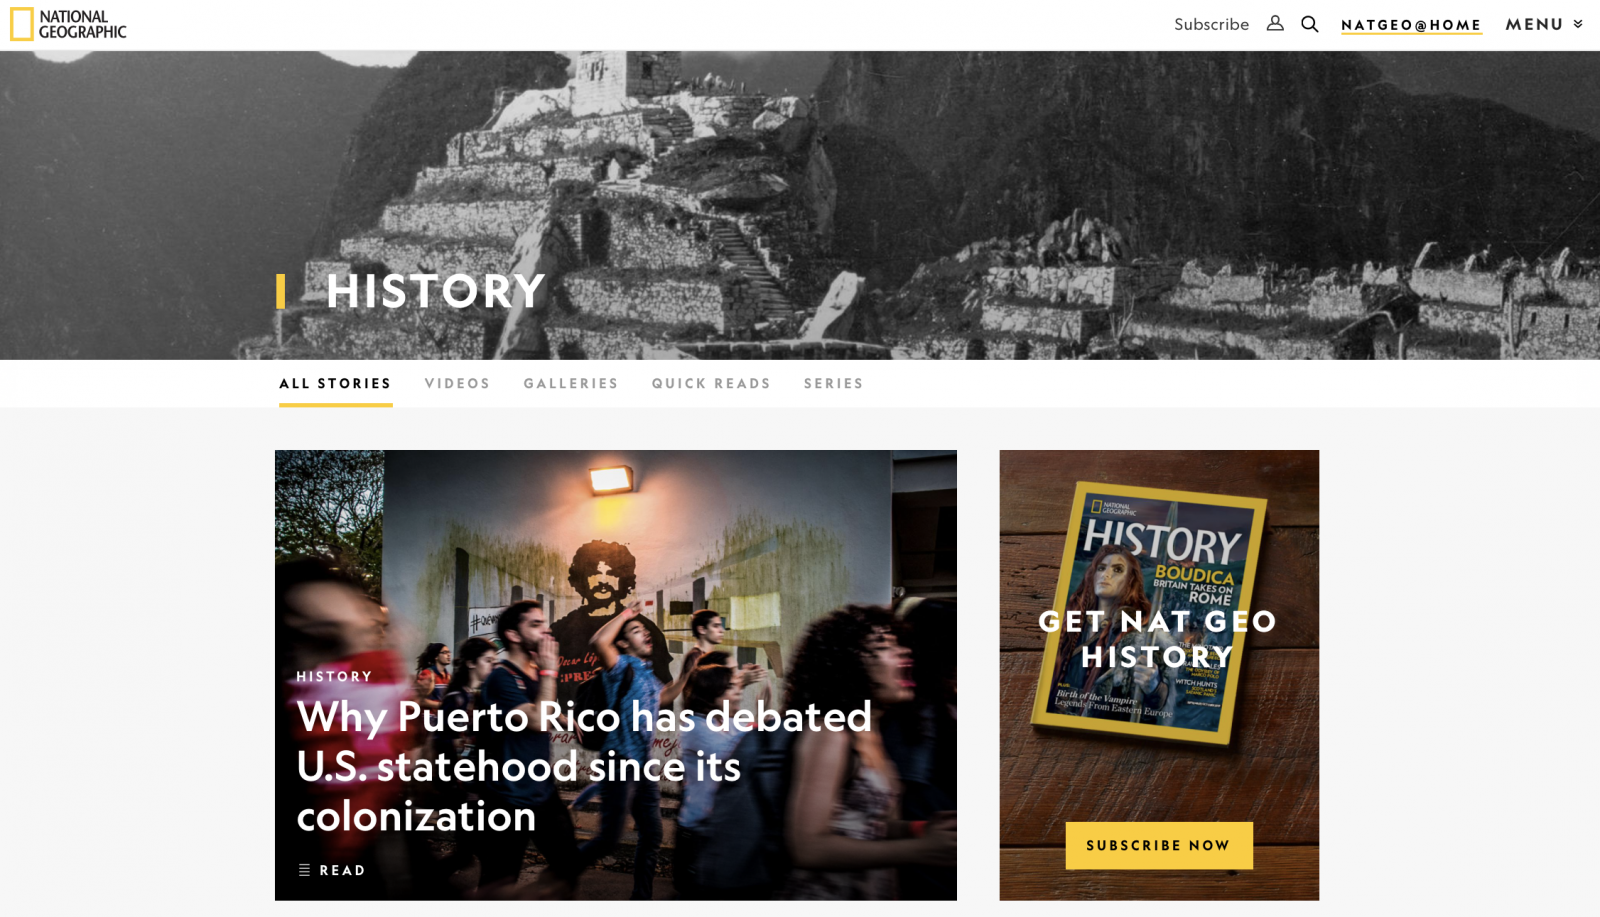 On Nat Geo History: Why Puerto Rico has debated U.S. statehood since its colonization